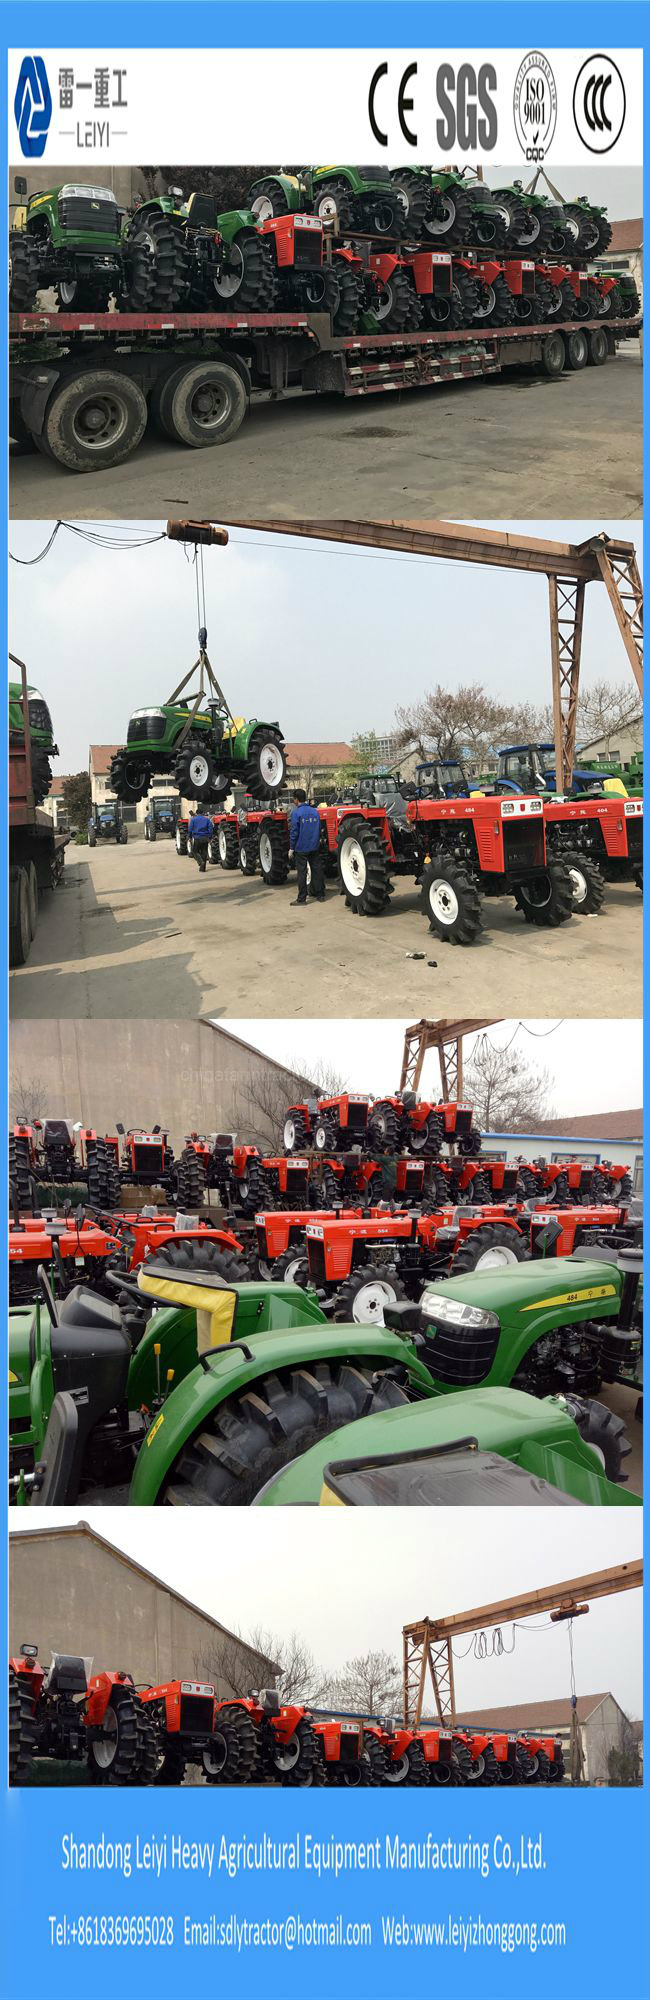 Factory Supply 4WD Farm/Mini/Diesel/Small Garden/Agricultural Tractor (40HP/48HP/55HP/70HP/125HP/135P/140HP/155HP)